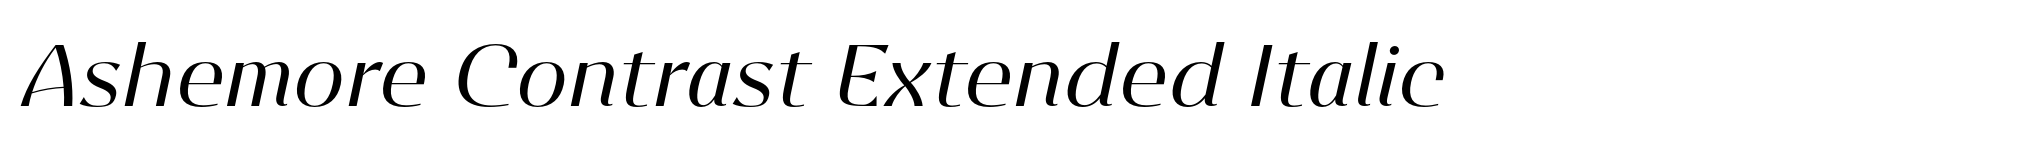 Ashemore Contrast Extended Italic image